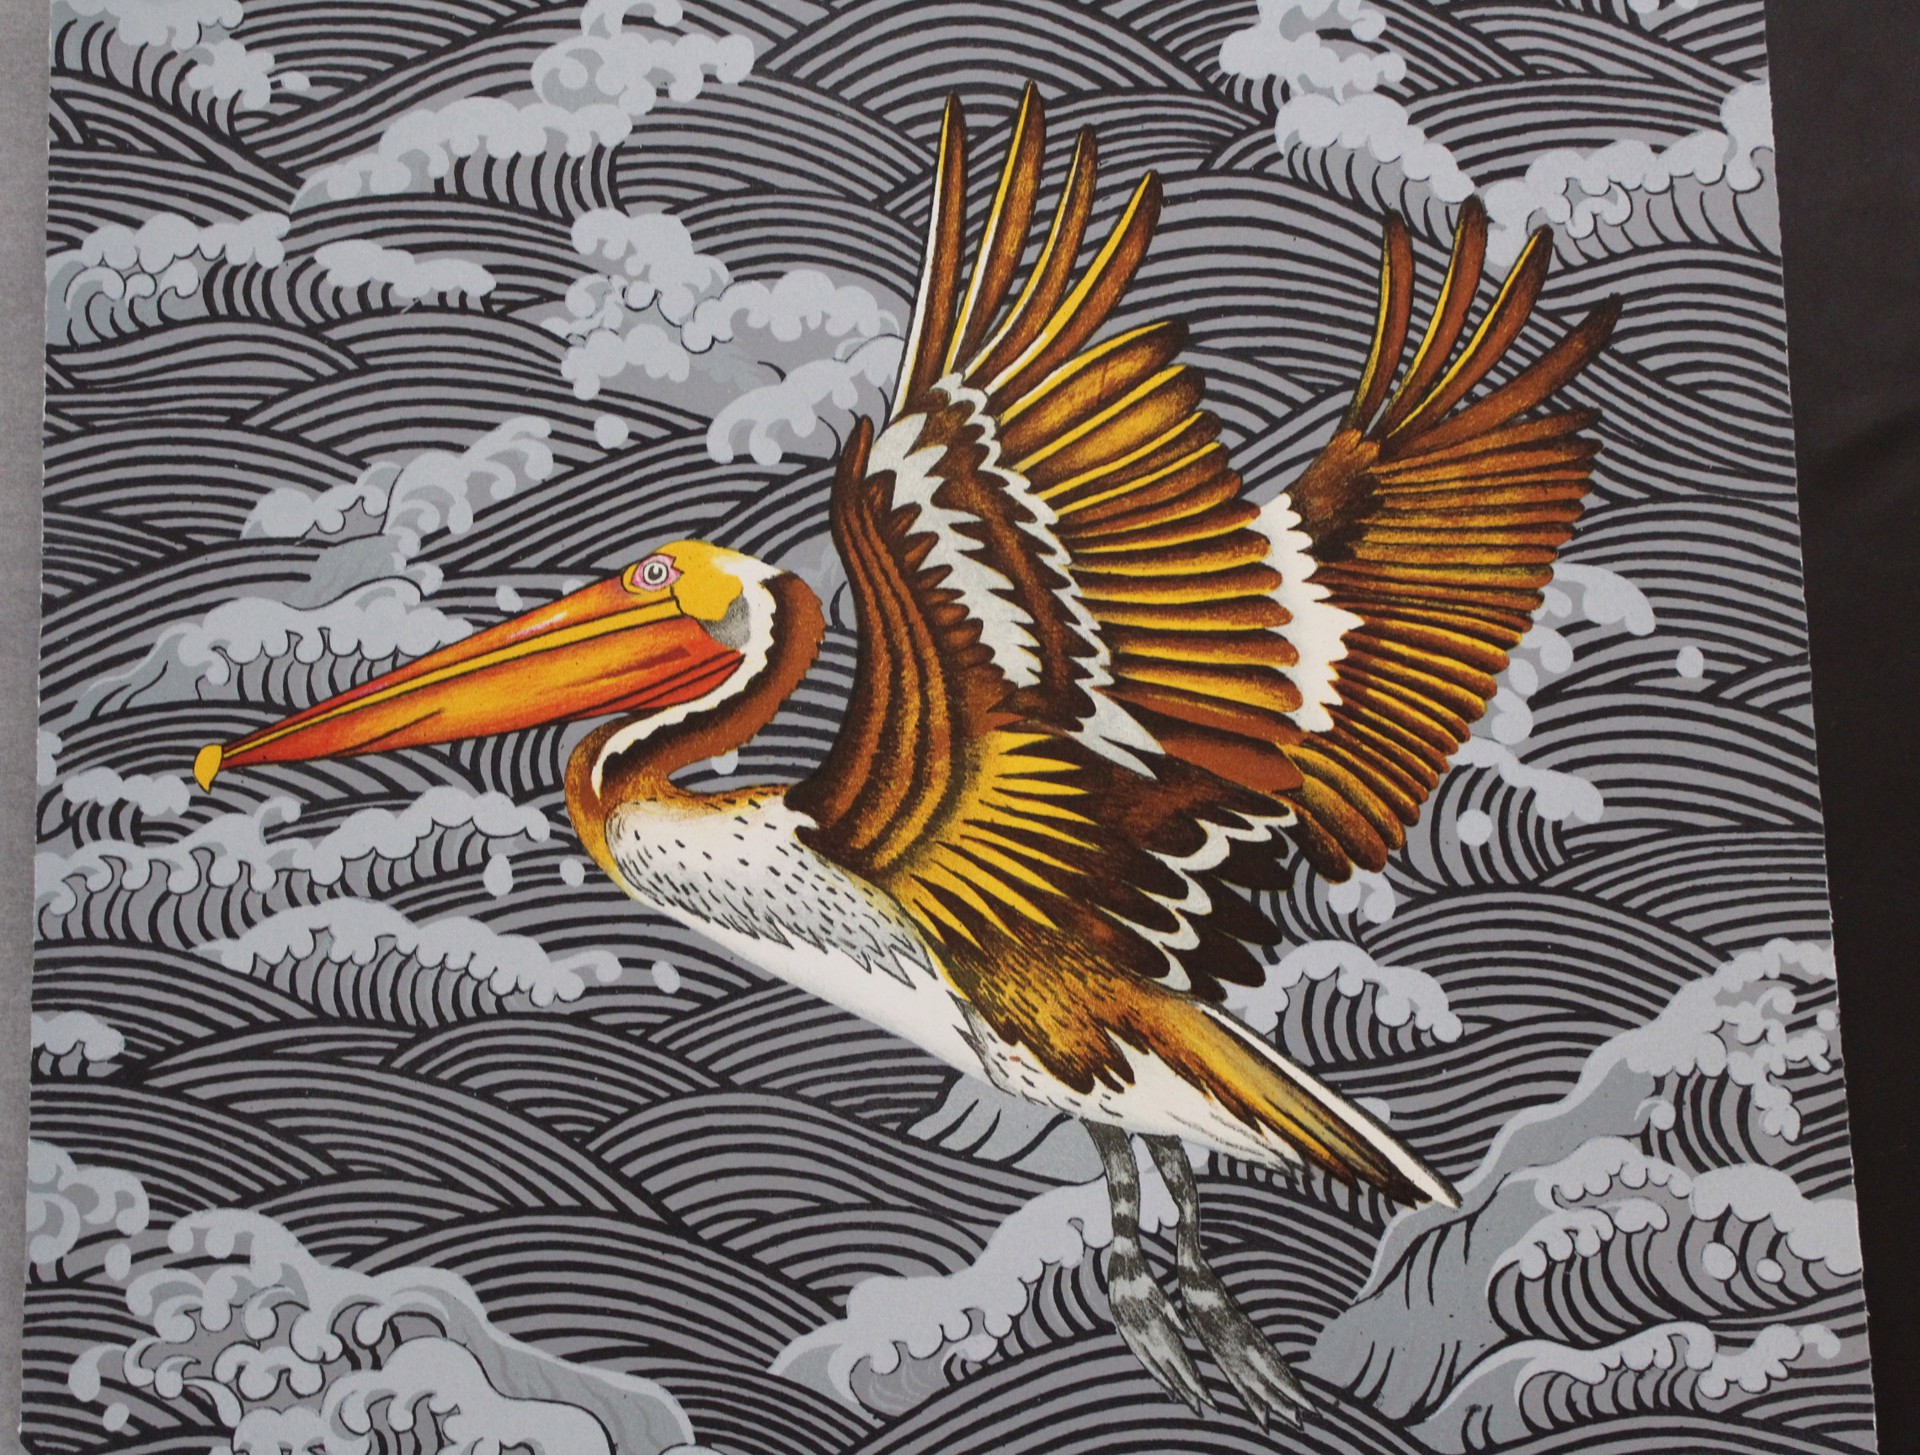 Brown Pelican, Turbulent Sea (silver) by Billy Hassell